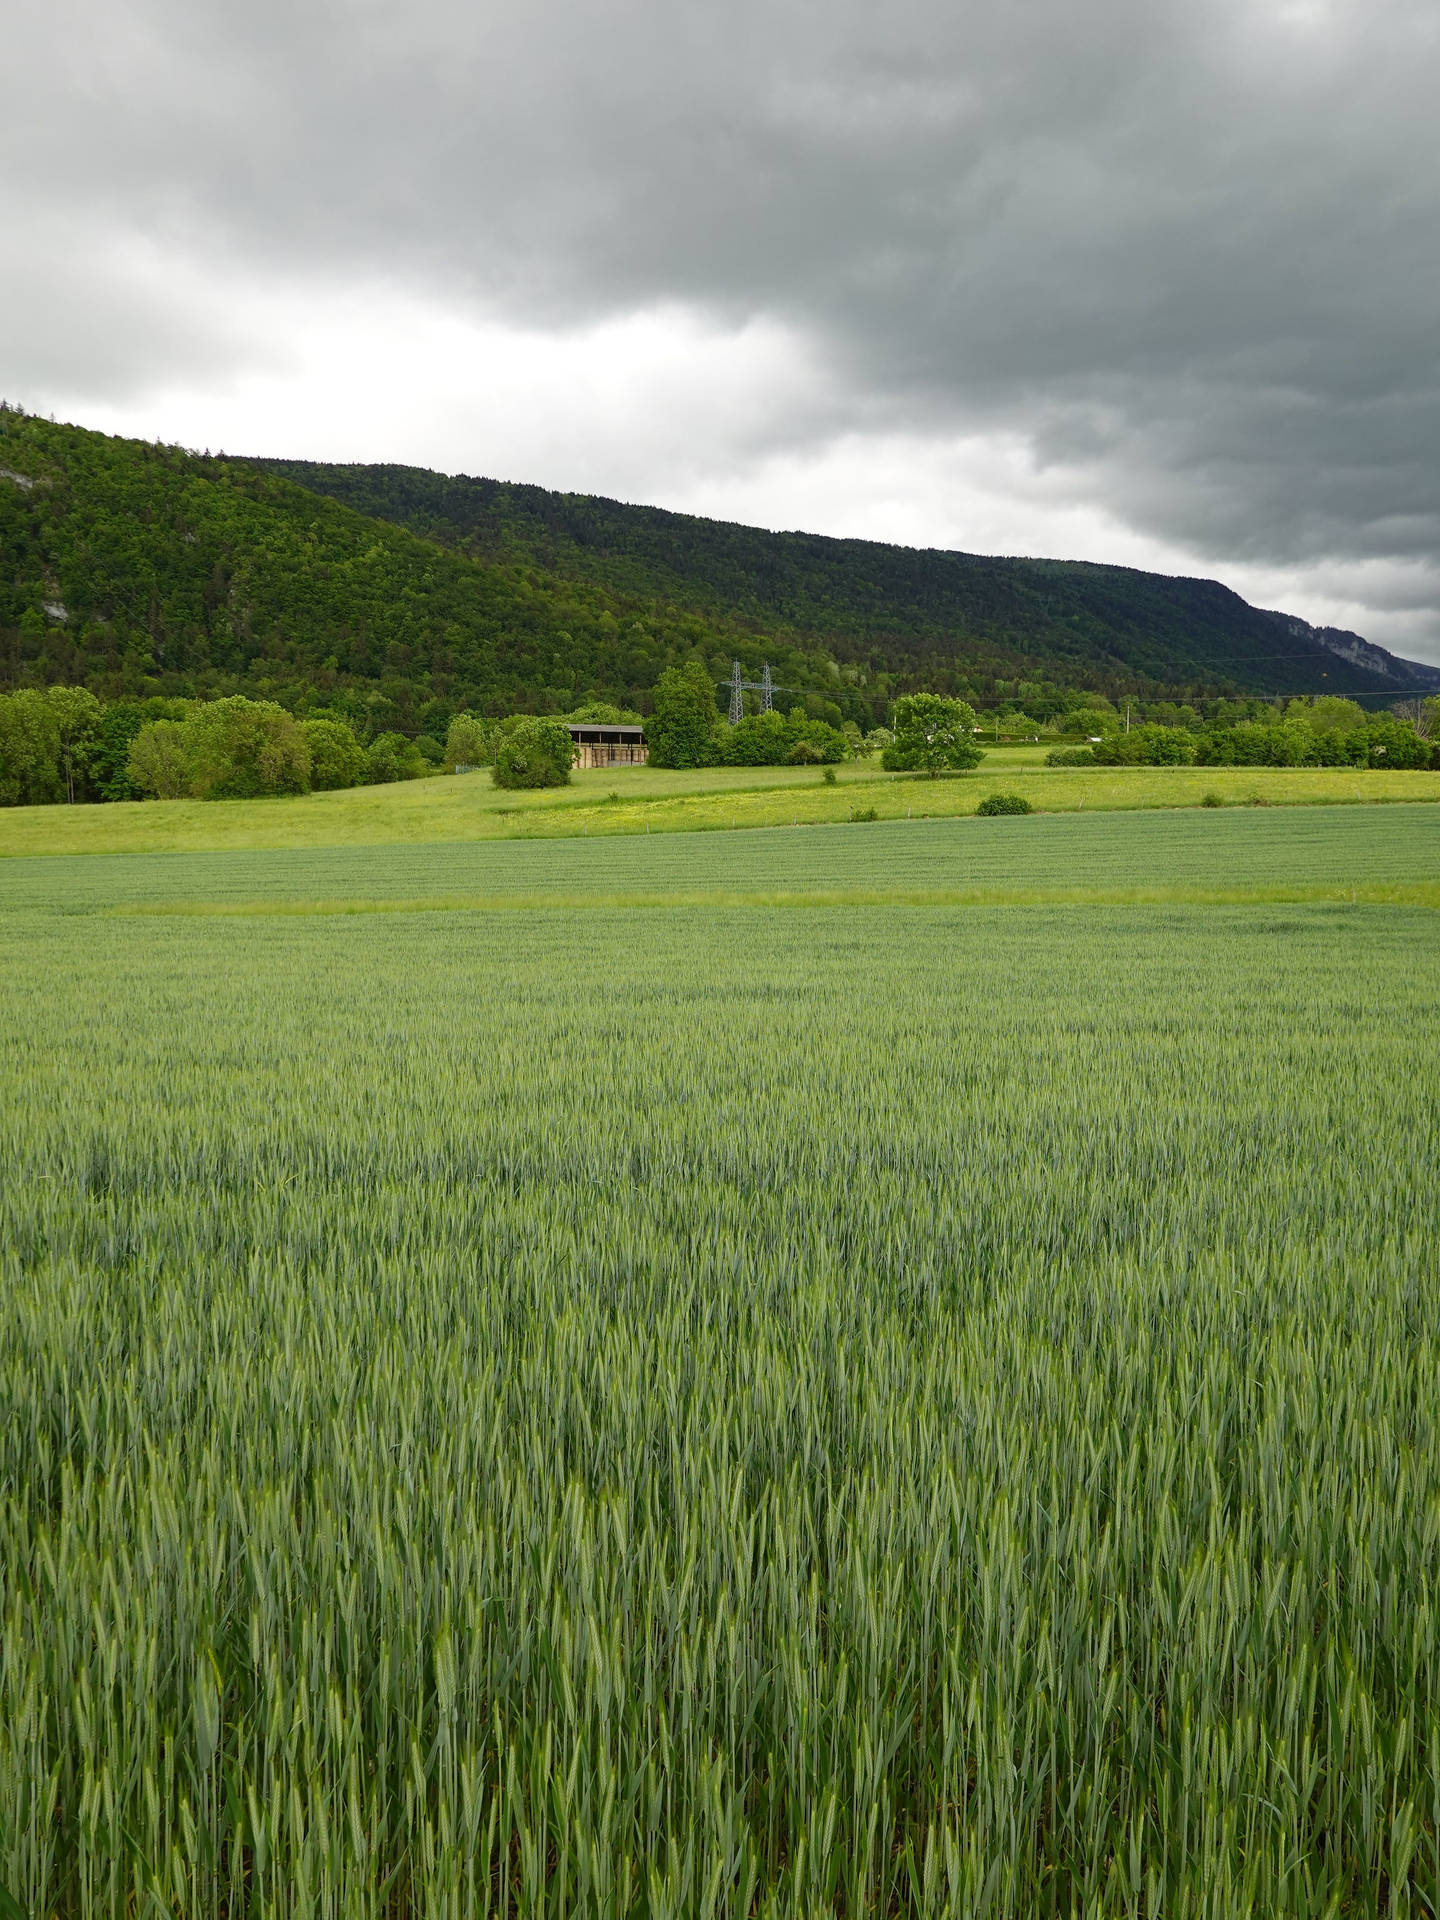 Green Hill And Wheat Barley Field